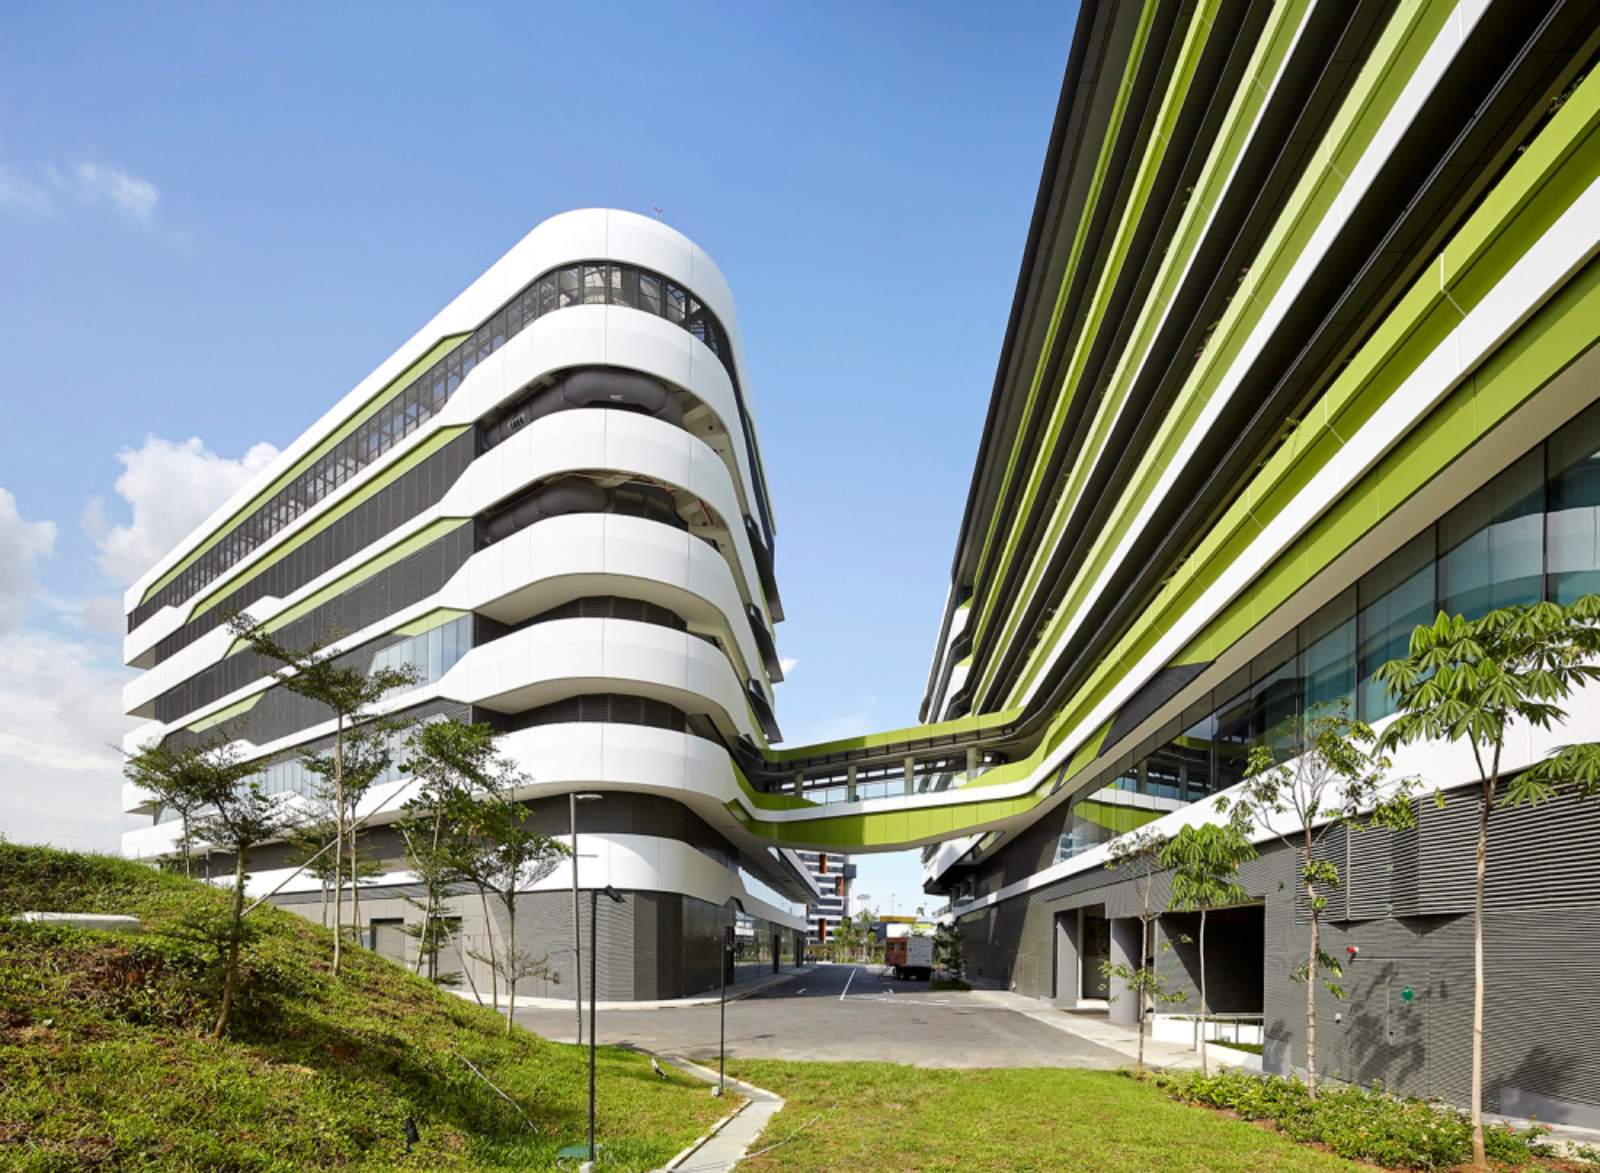 Singapore University Of Technology And Design By UNStudio DP Architects 02 